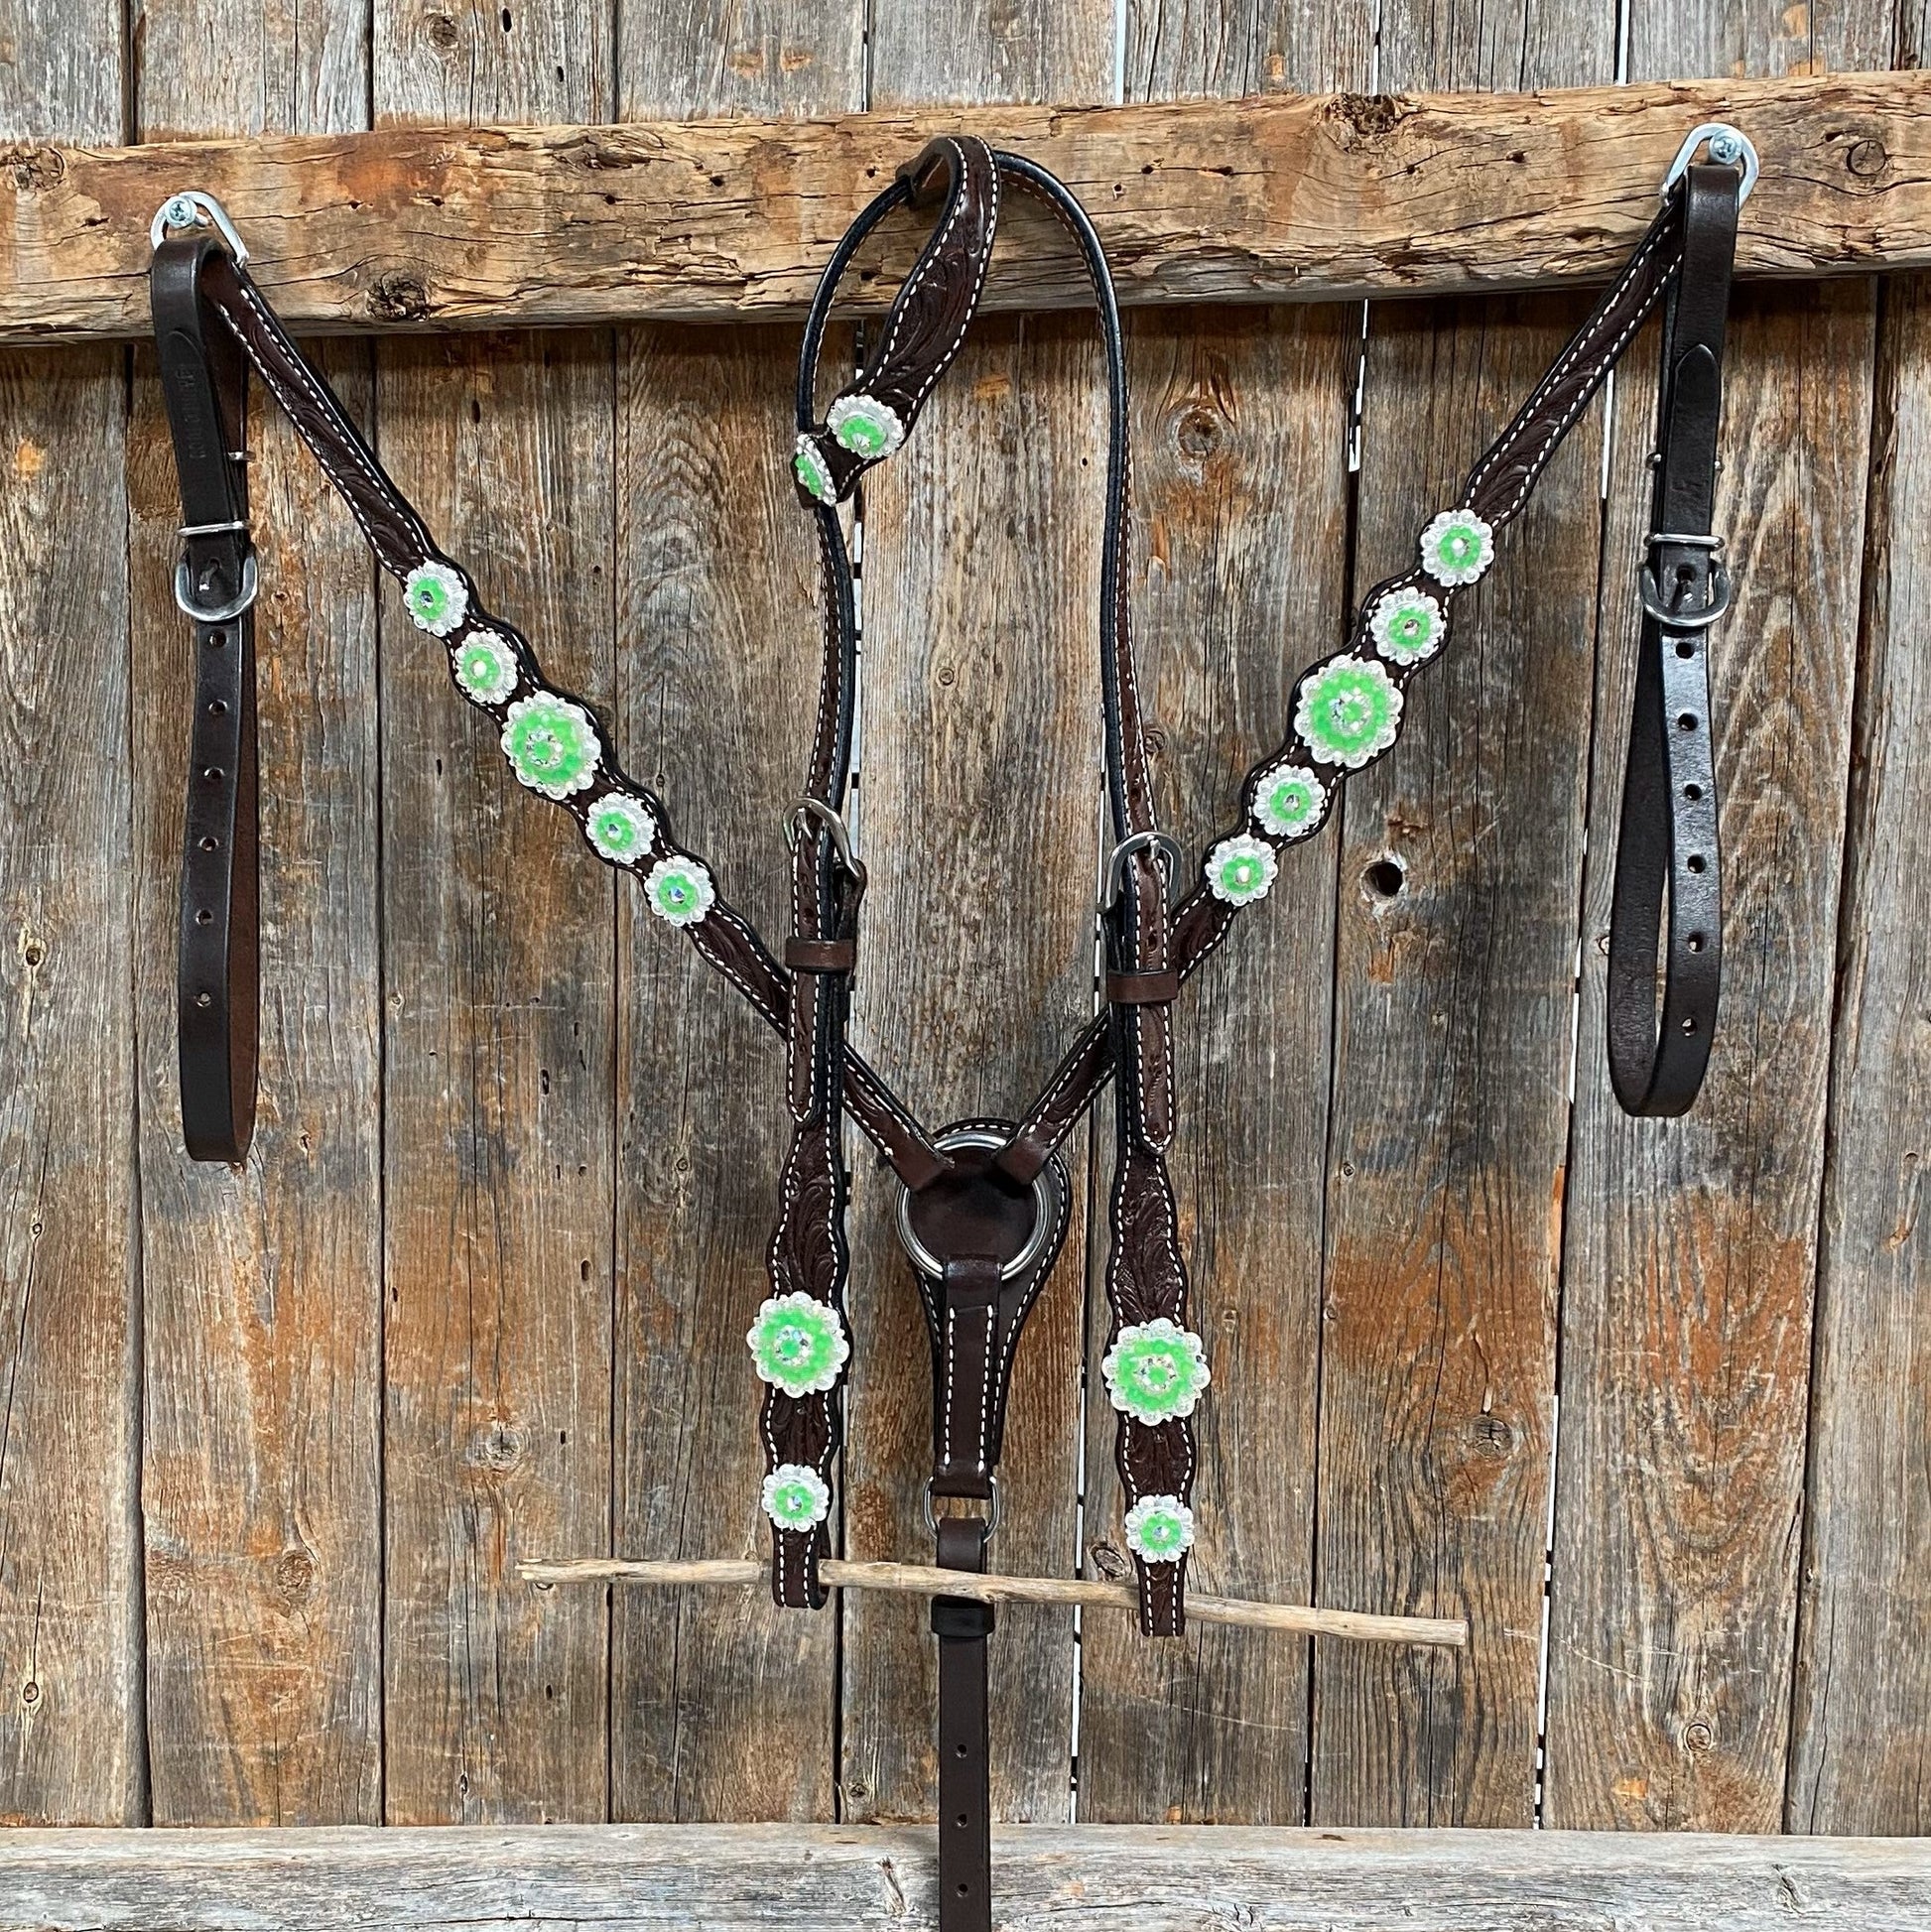 Dark Oil Floral Neon Green Browband / One Ear Tack Set #BBBC560 - RODEO DRIVE